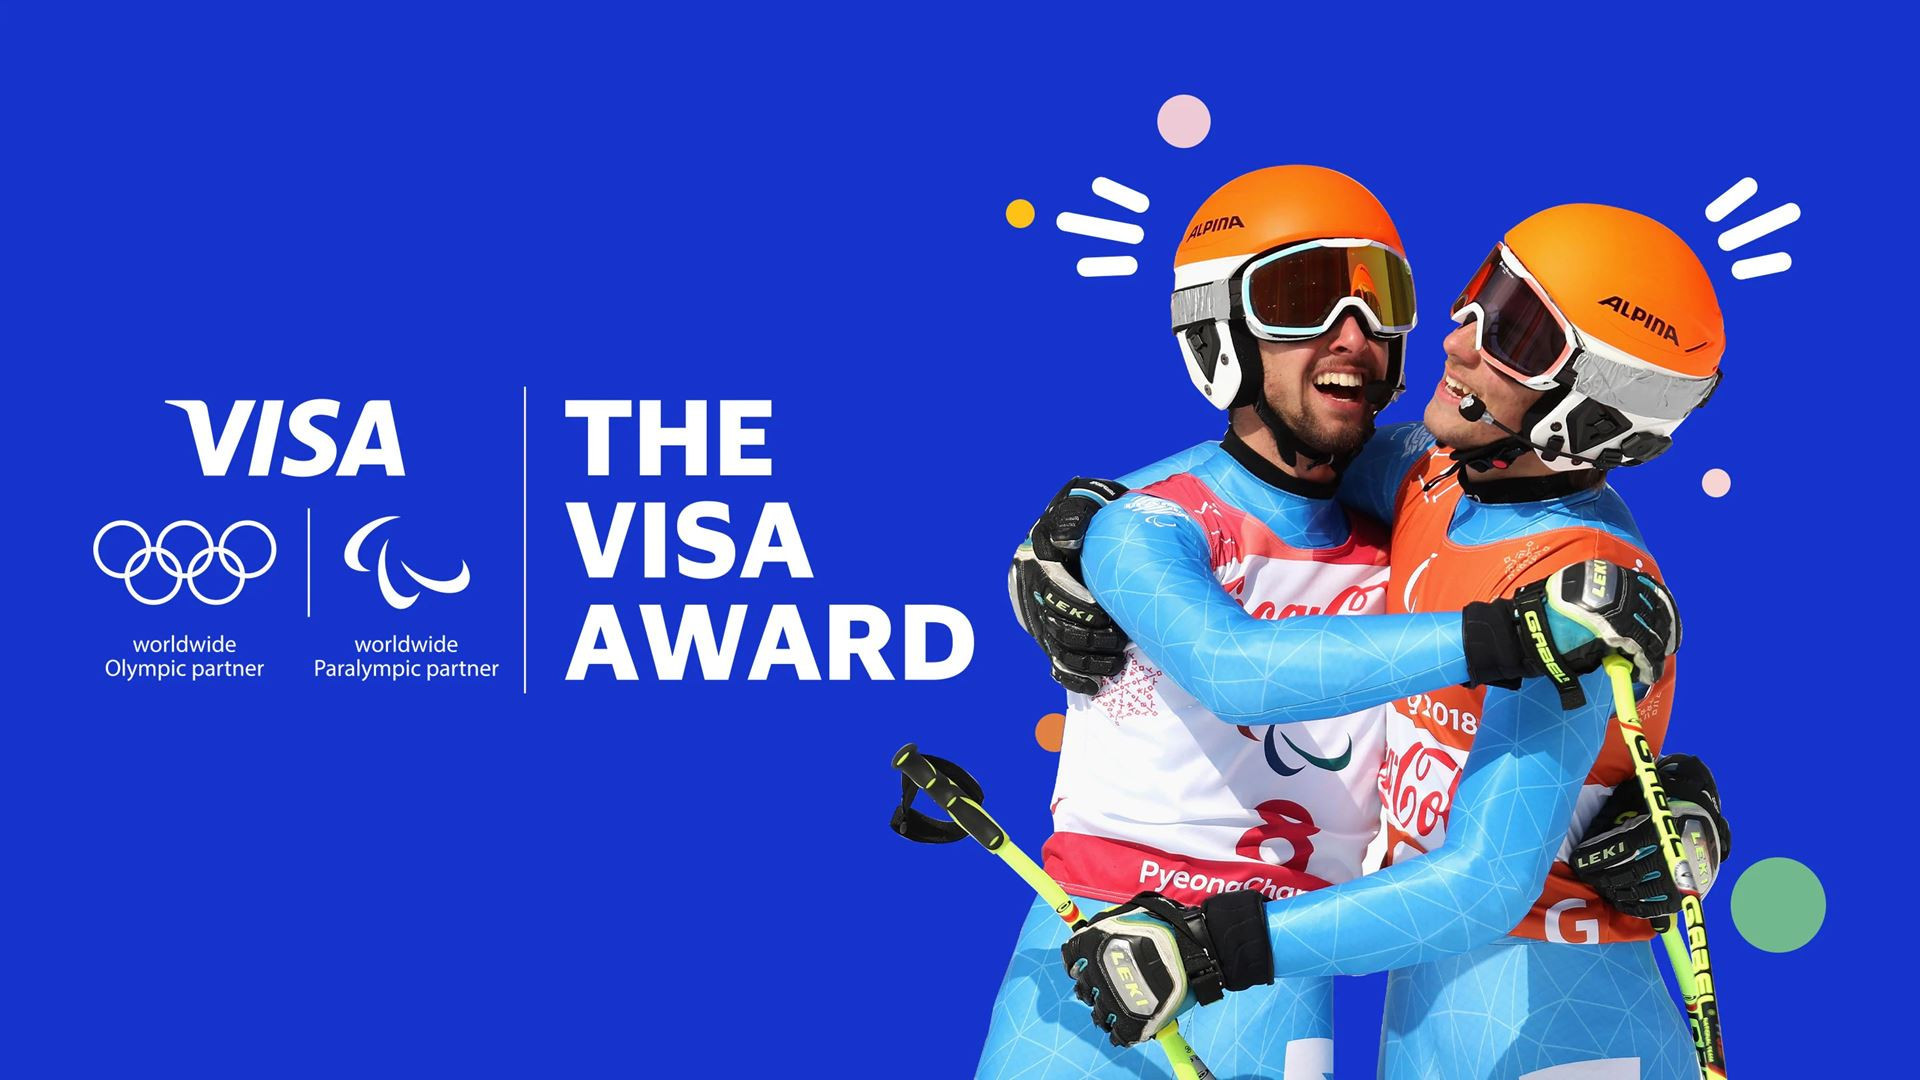 The Visa Award recognising special Olympic and Paralympic moments launched at Beijing 2022